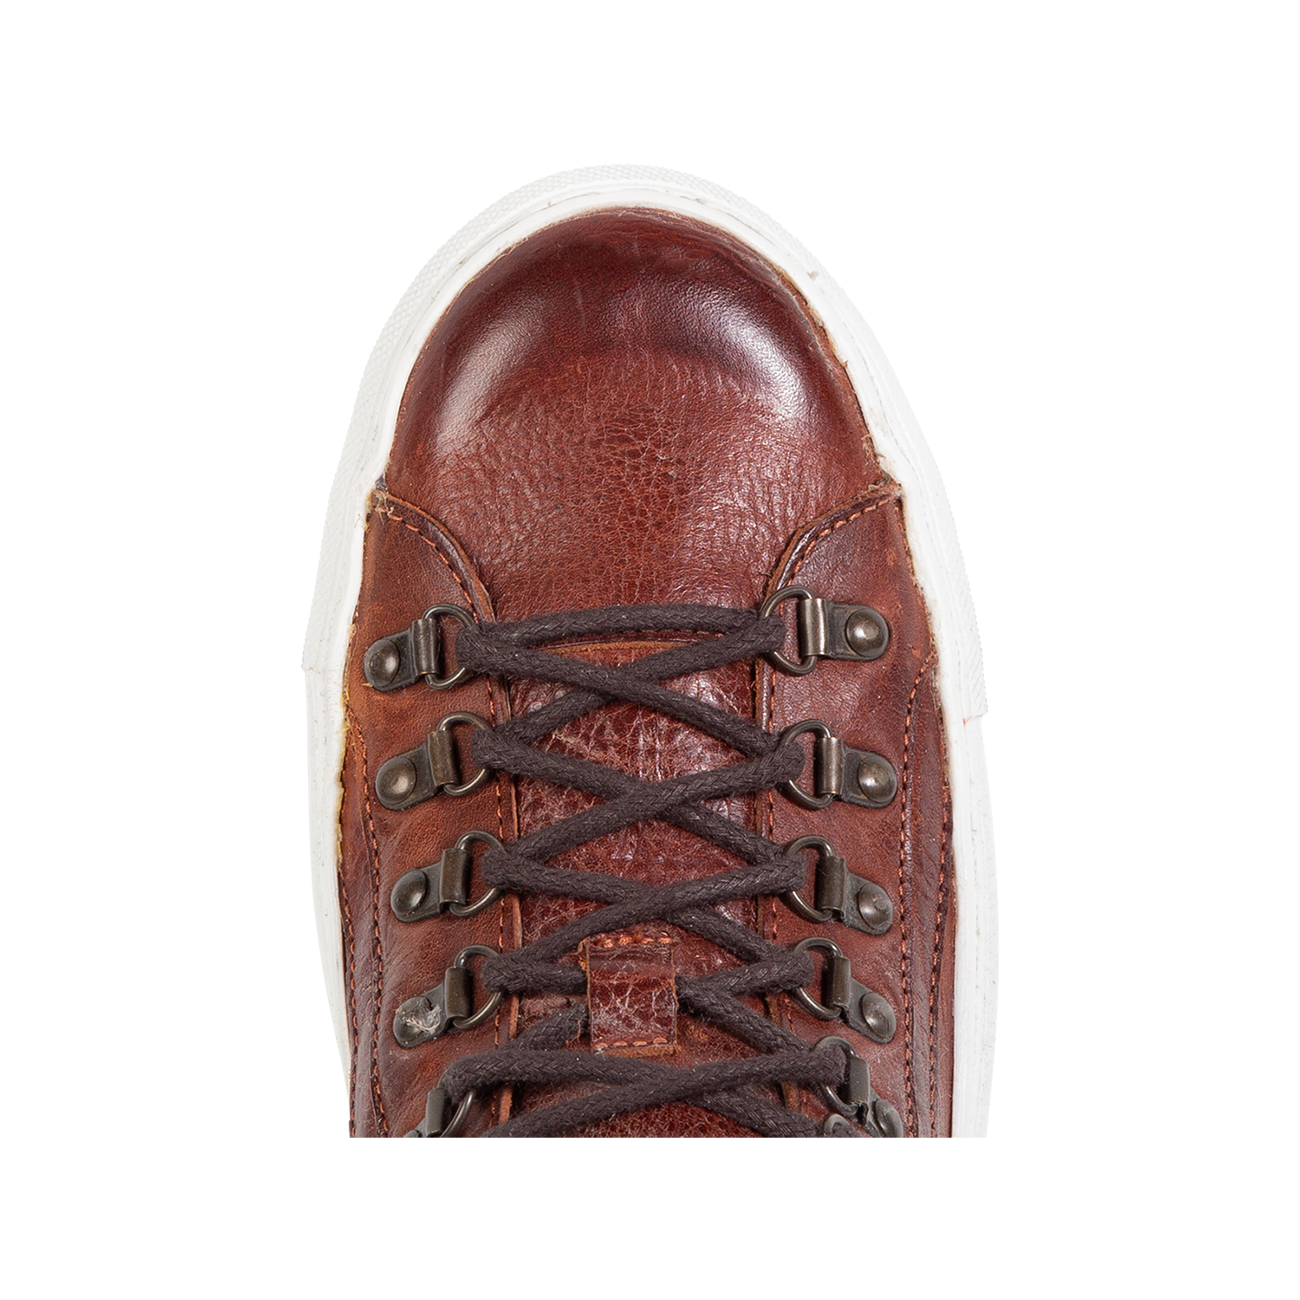 Top view showing round toe and brass rivets on FREEBIRD men's Shelby wine shoe